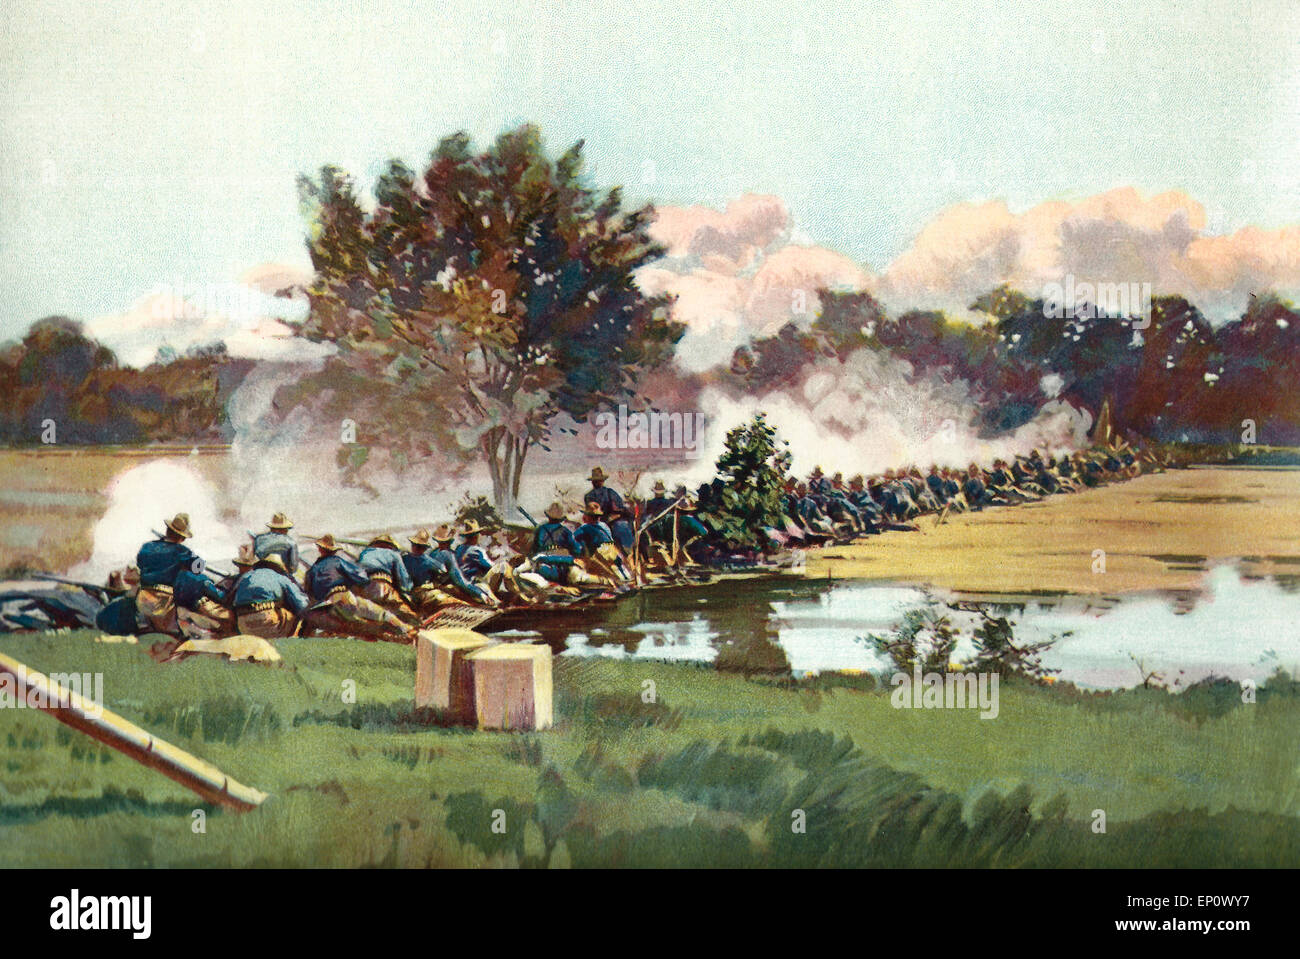 On the Firing Line. 'M' Company, Twentieth Kansas, behind a rice dike in the first position taken February 4, 1899.  THis view was taken about 10 AM, Sunday, February 5, 1899, during heavy fire.  The first man in the regiment to fall in battle was killed at the moment of taking this picture, shot through the head.  His body may be seen about the tenth man from the left.  The Company is in the act of firing a volley.  The effect of Pratt's death may be seen from the fact that the smoke indicates that several men on each side of him failed to fire. Philippine American War Stock Photo